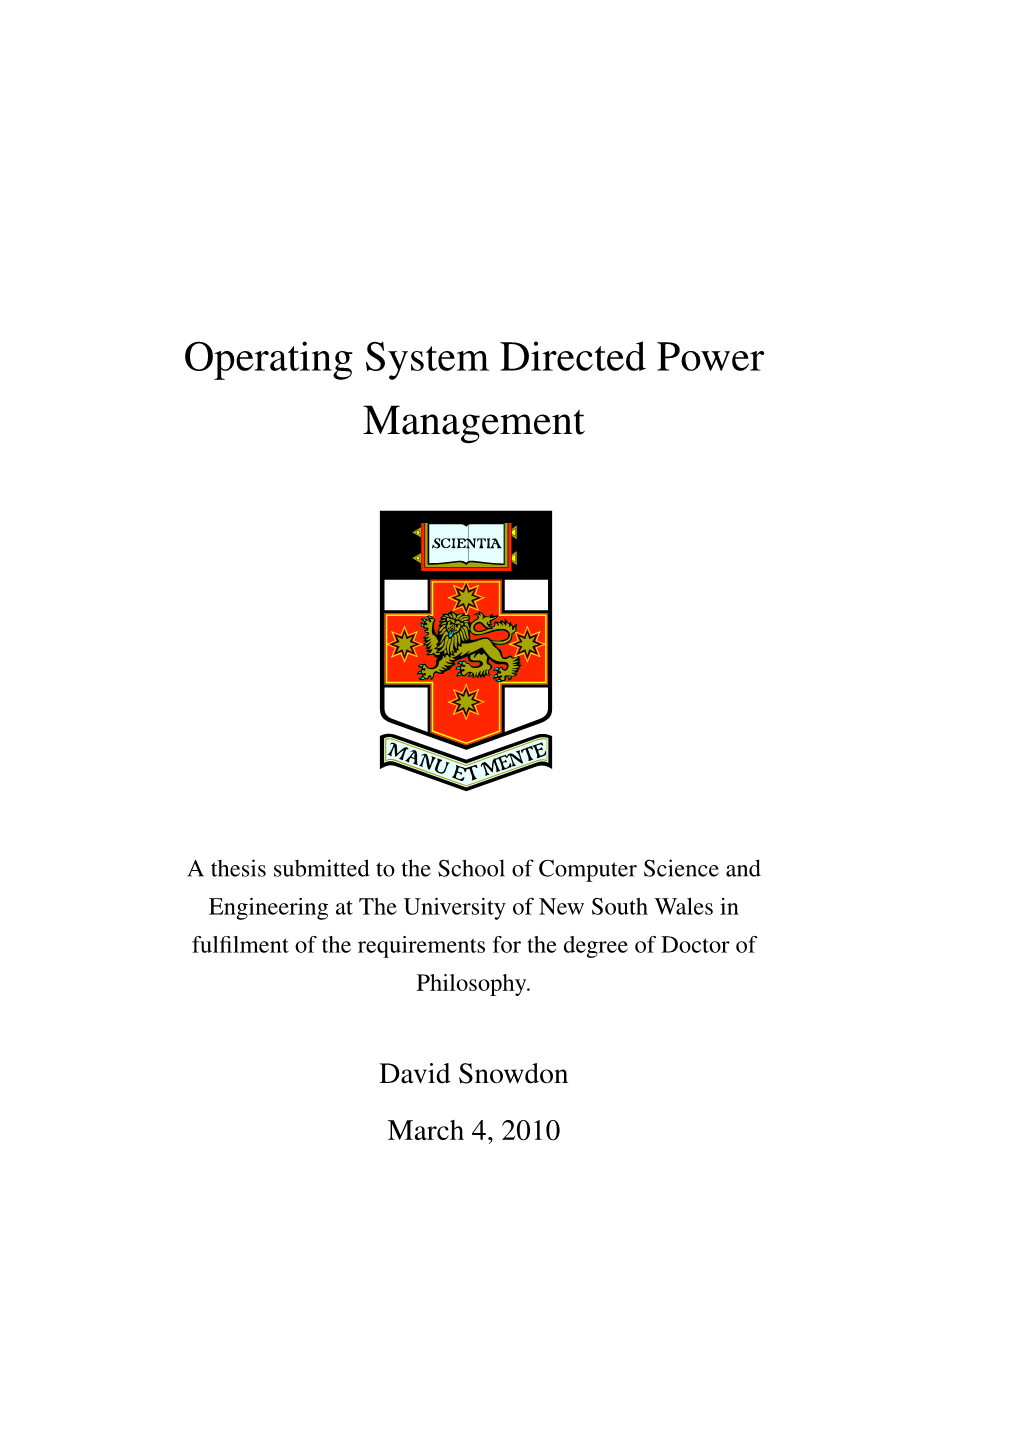 Operating System Directed Power Management